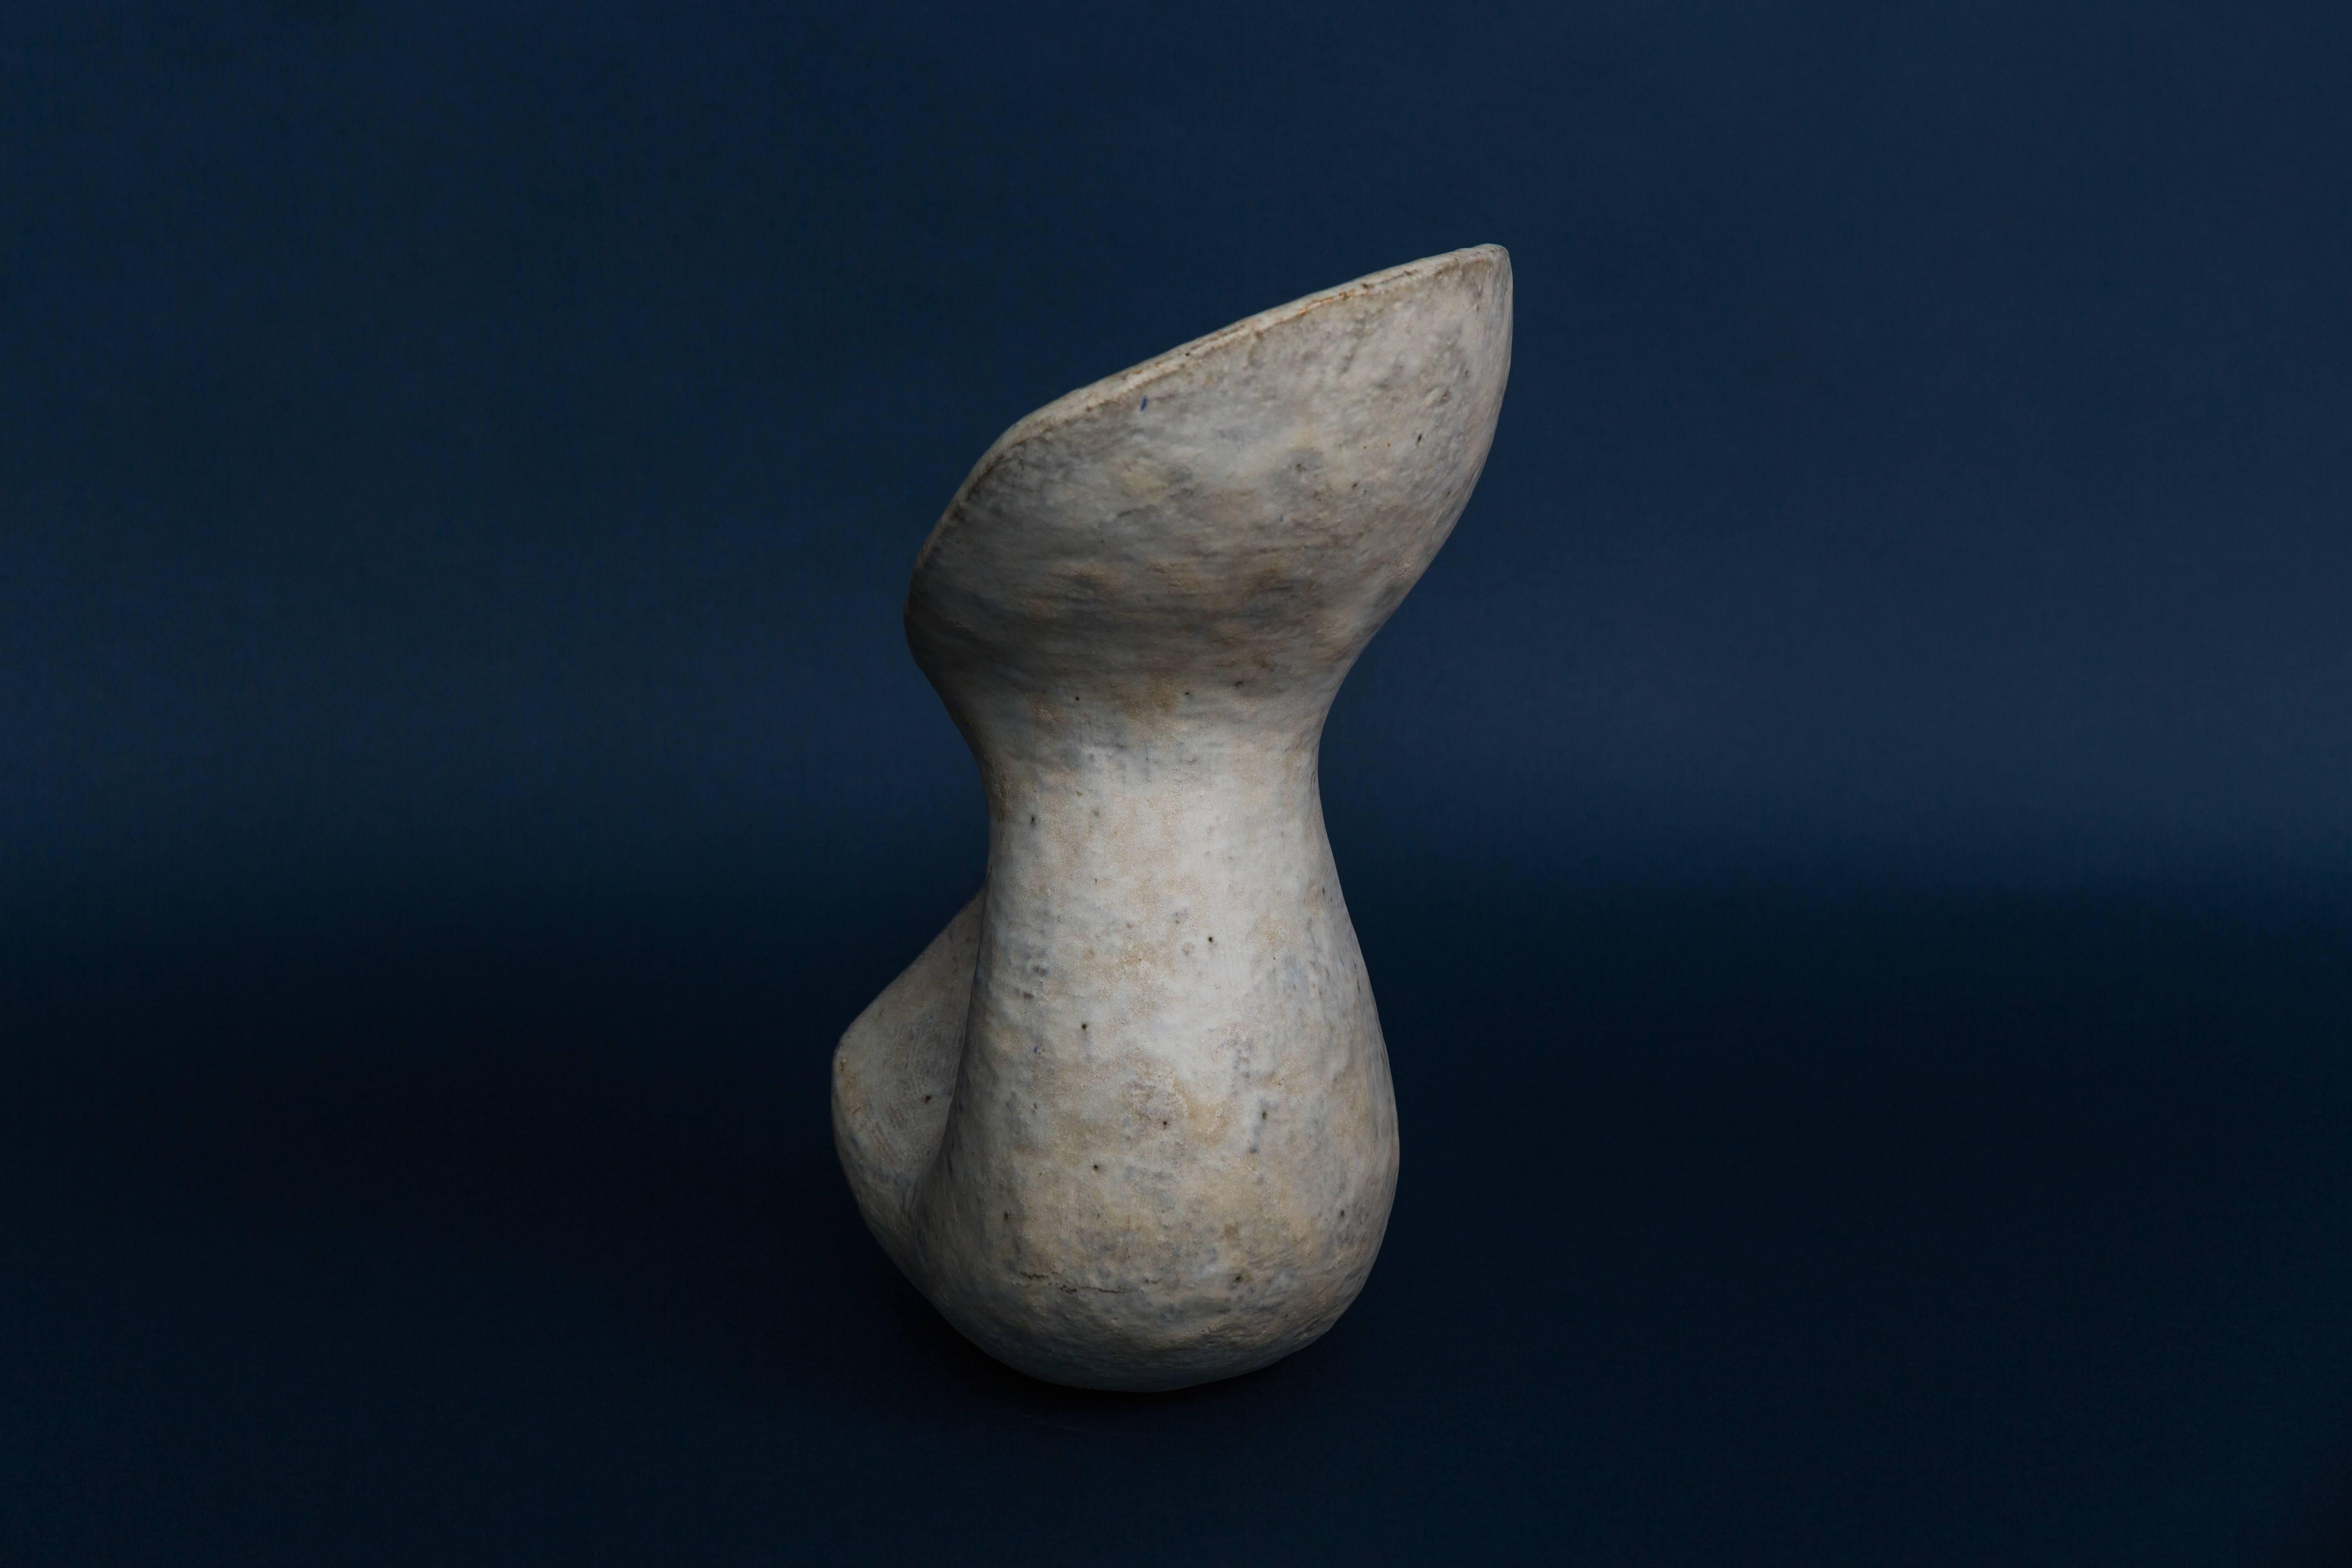 Valentine Schlegel rare biomorphic glazed ceramic vase beautifully contoured, sensual and organic in form, France, 1955.  Incised 'V. Schlegel' to underside.

Valentine Schlegel (French, b. 1926) was one of the most important modernist ceramicists